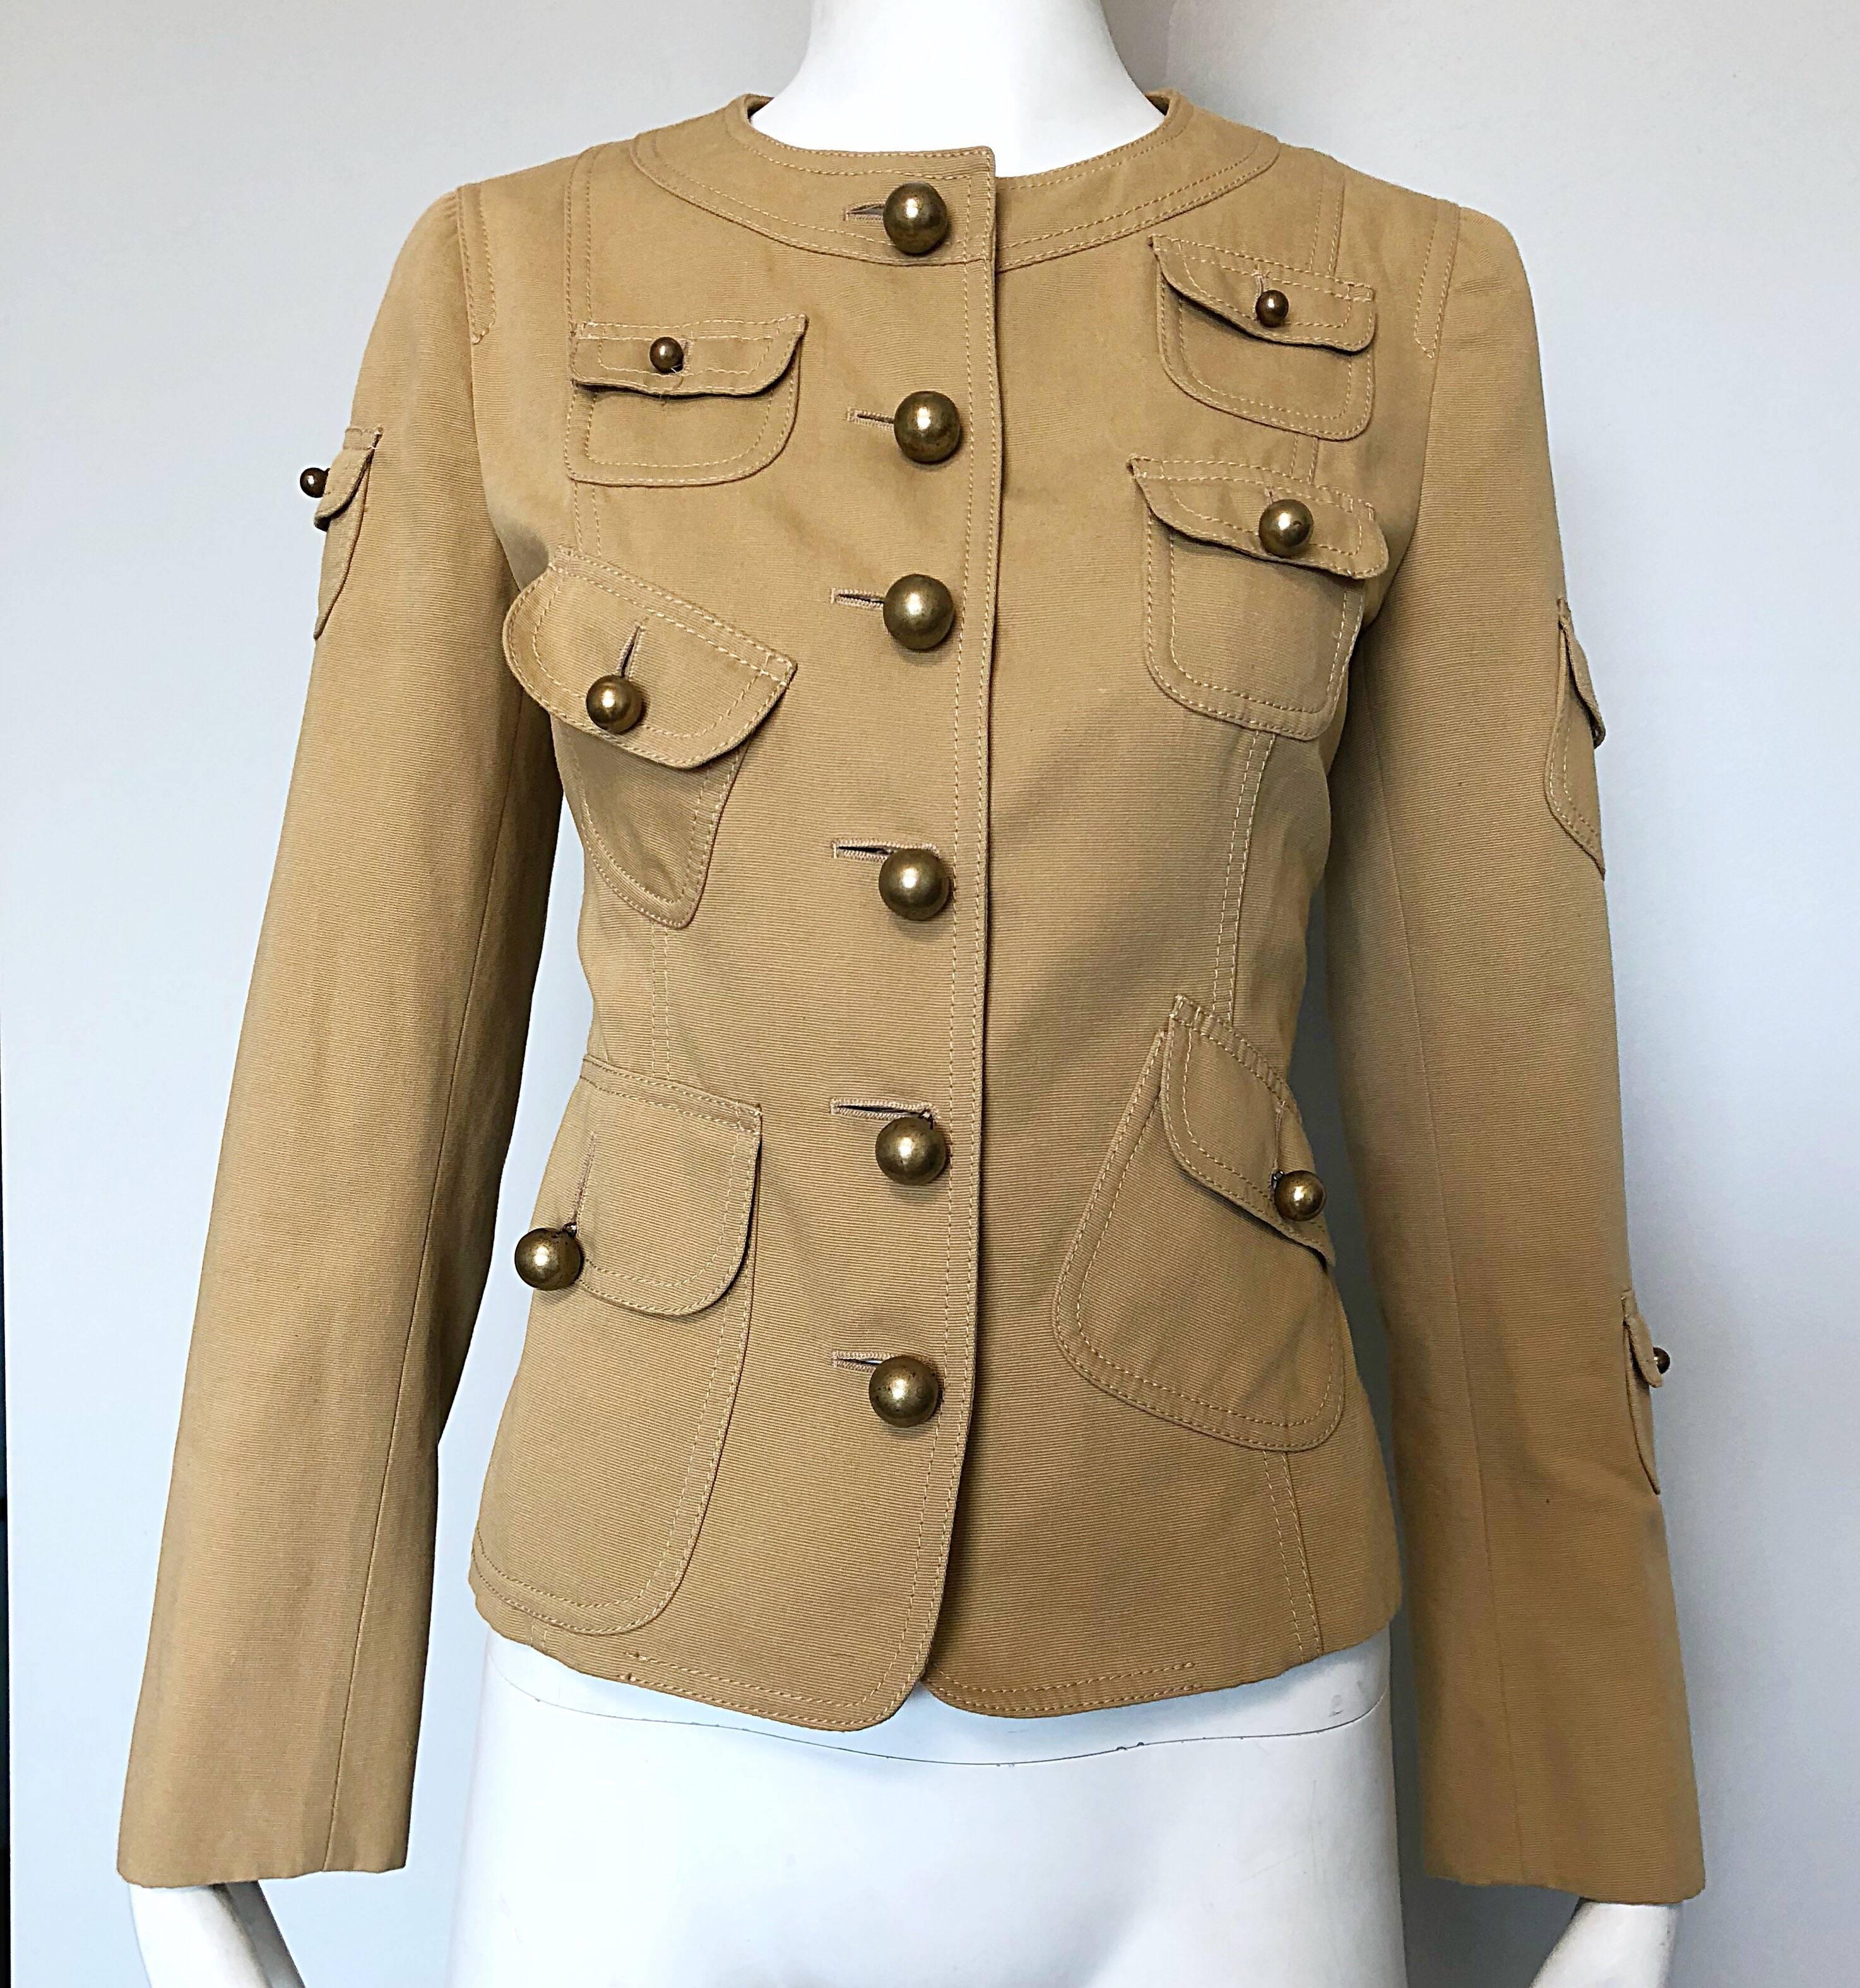 Vintage Moschino Cheap & Chic 1990s Size 6 Khaki Cotton Military Inspired Jacket In Excellent Condition For Sale In San Diego, CA